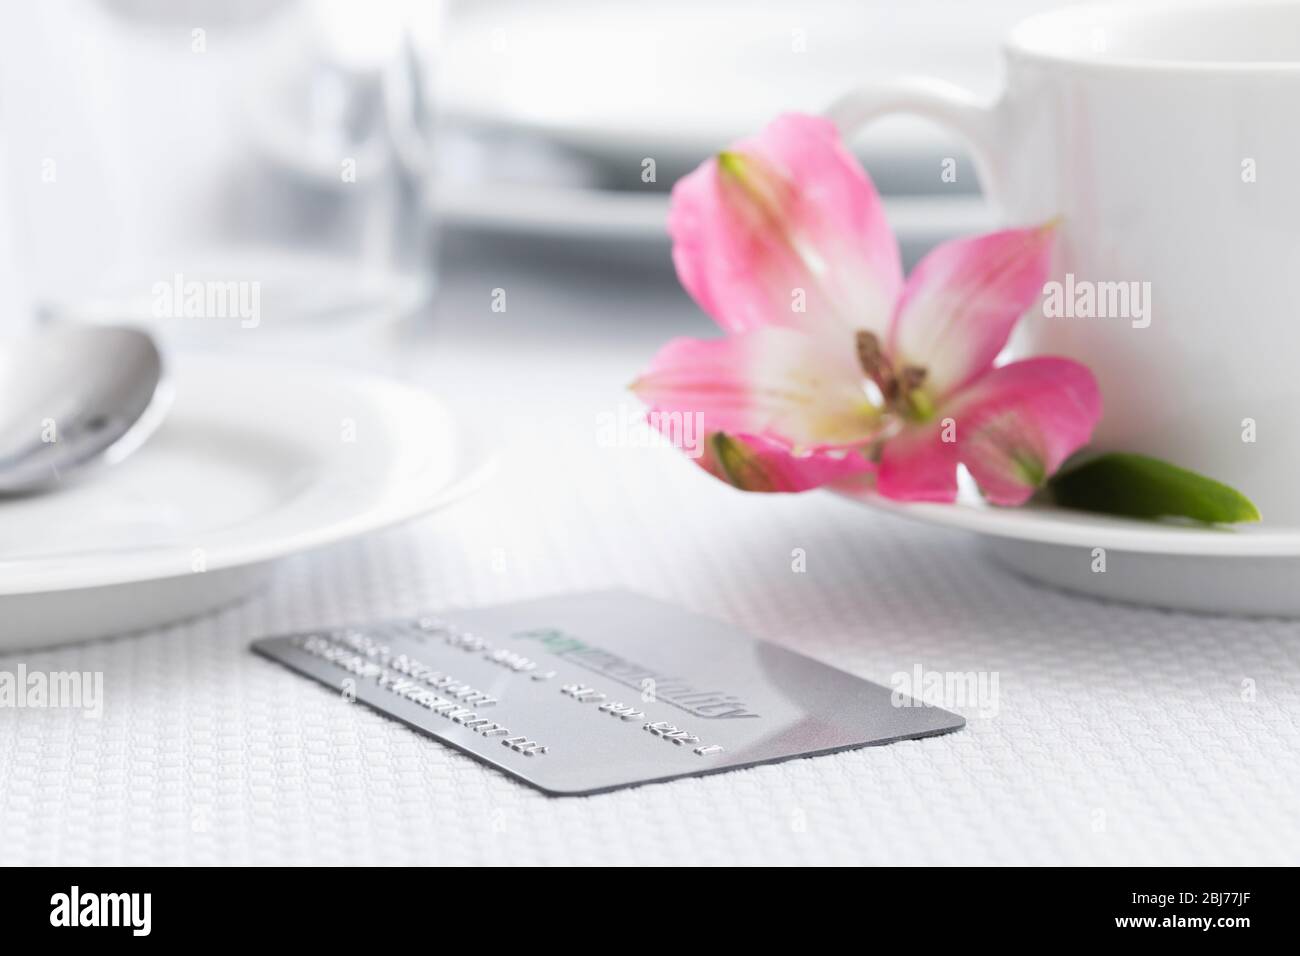 Credit card on restaurant table Stock Photo